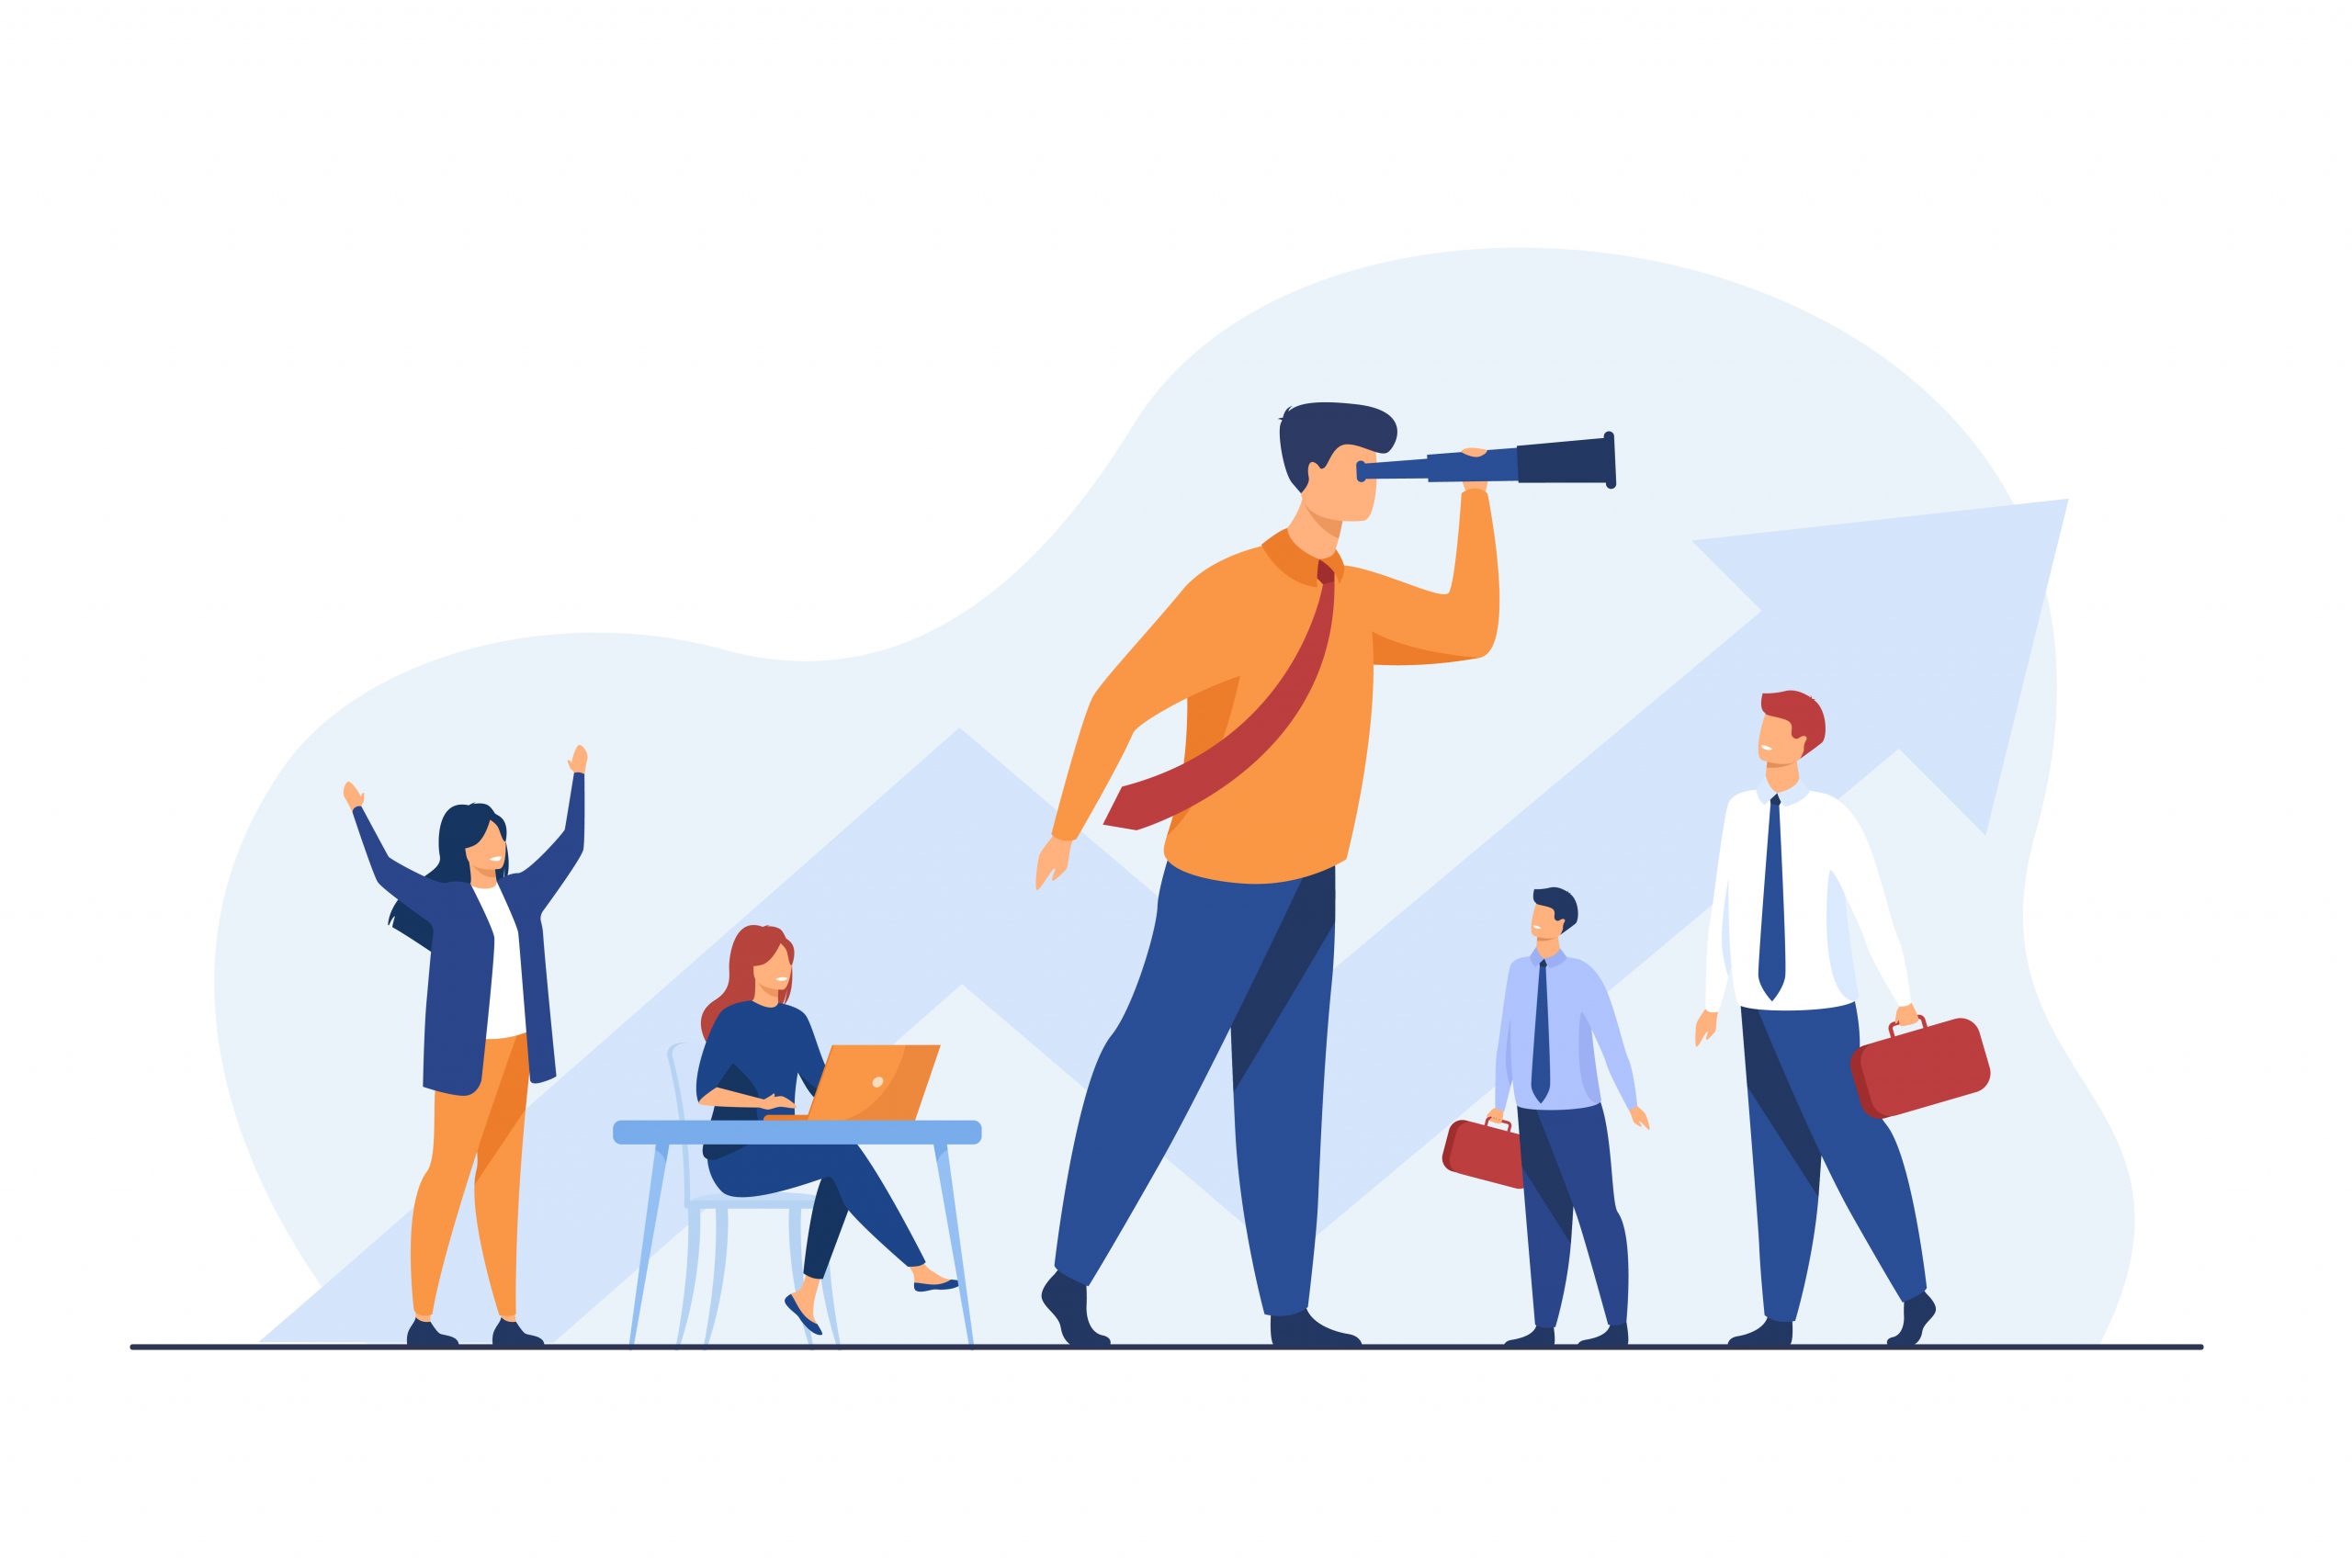 Team leader and teamwork concept. Businessman with telescope looking faraway an leading team. Flat vector illustration for planning, challenge, leadership topics